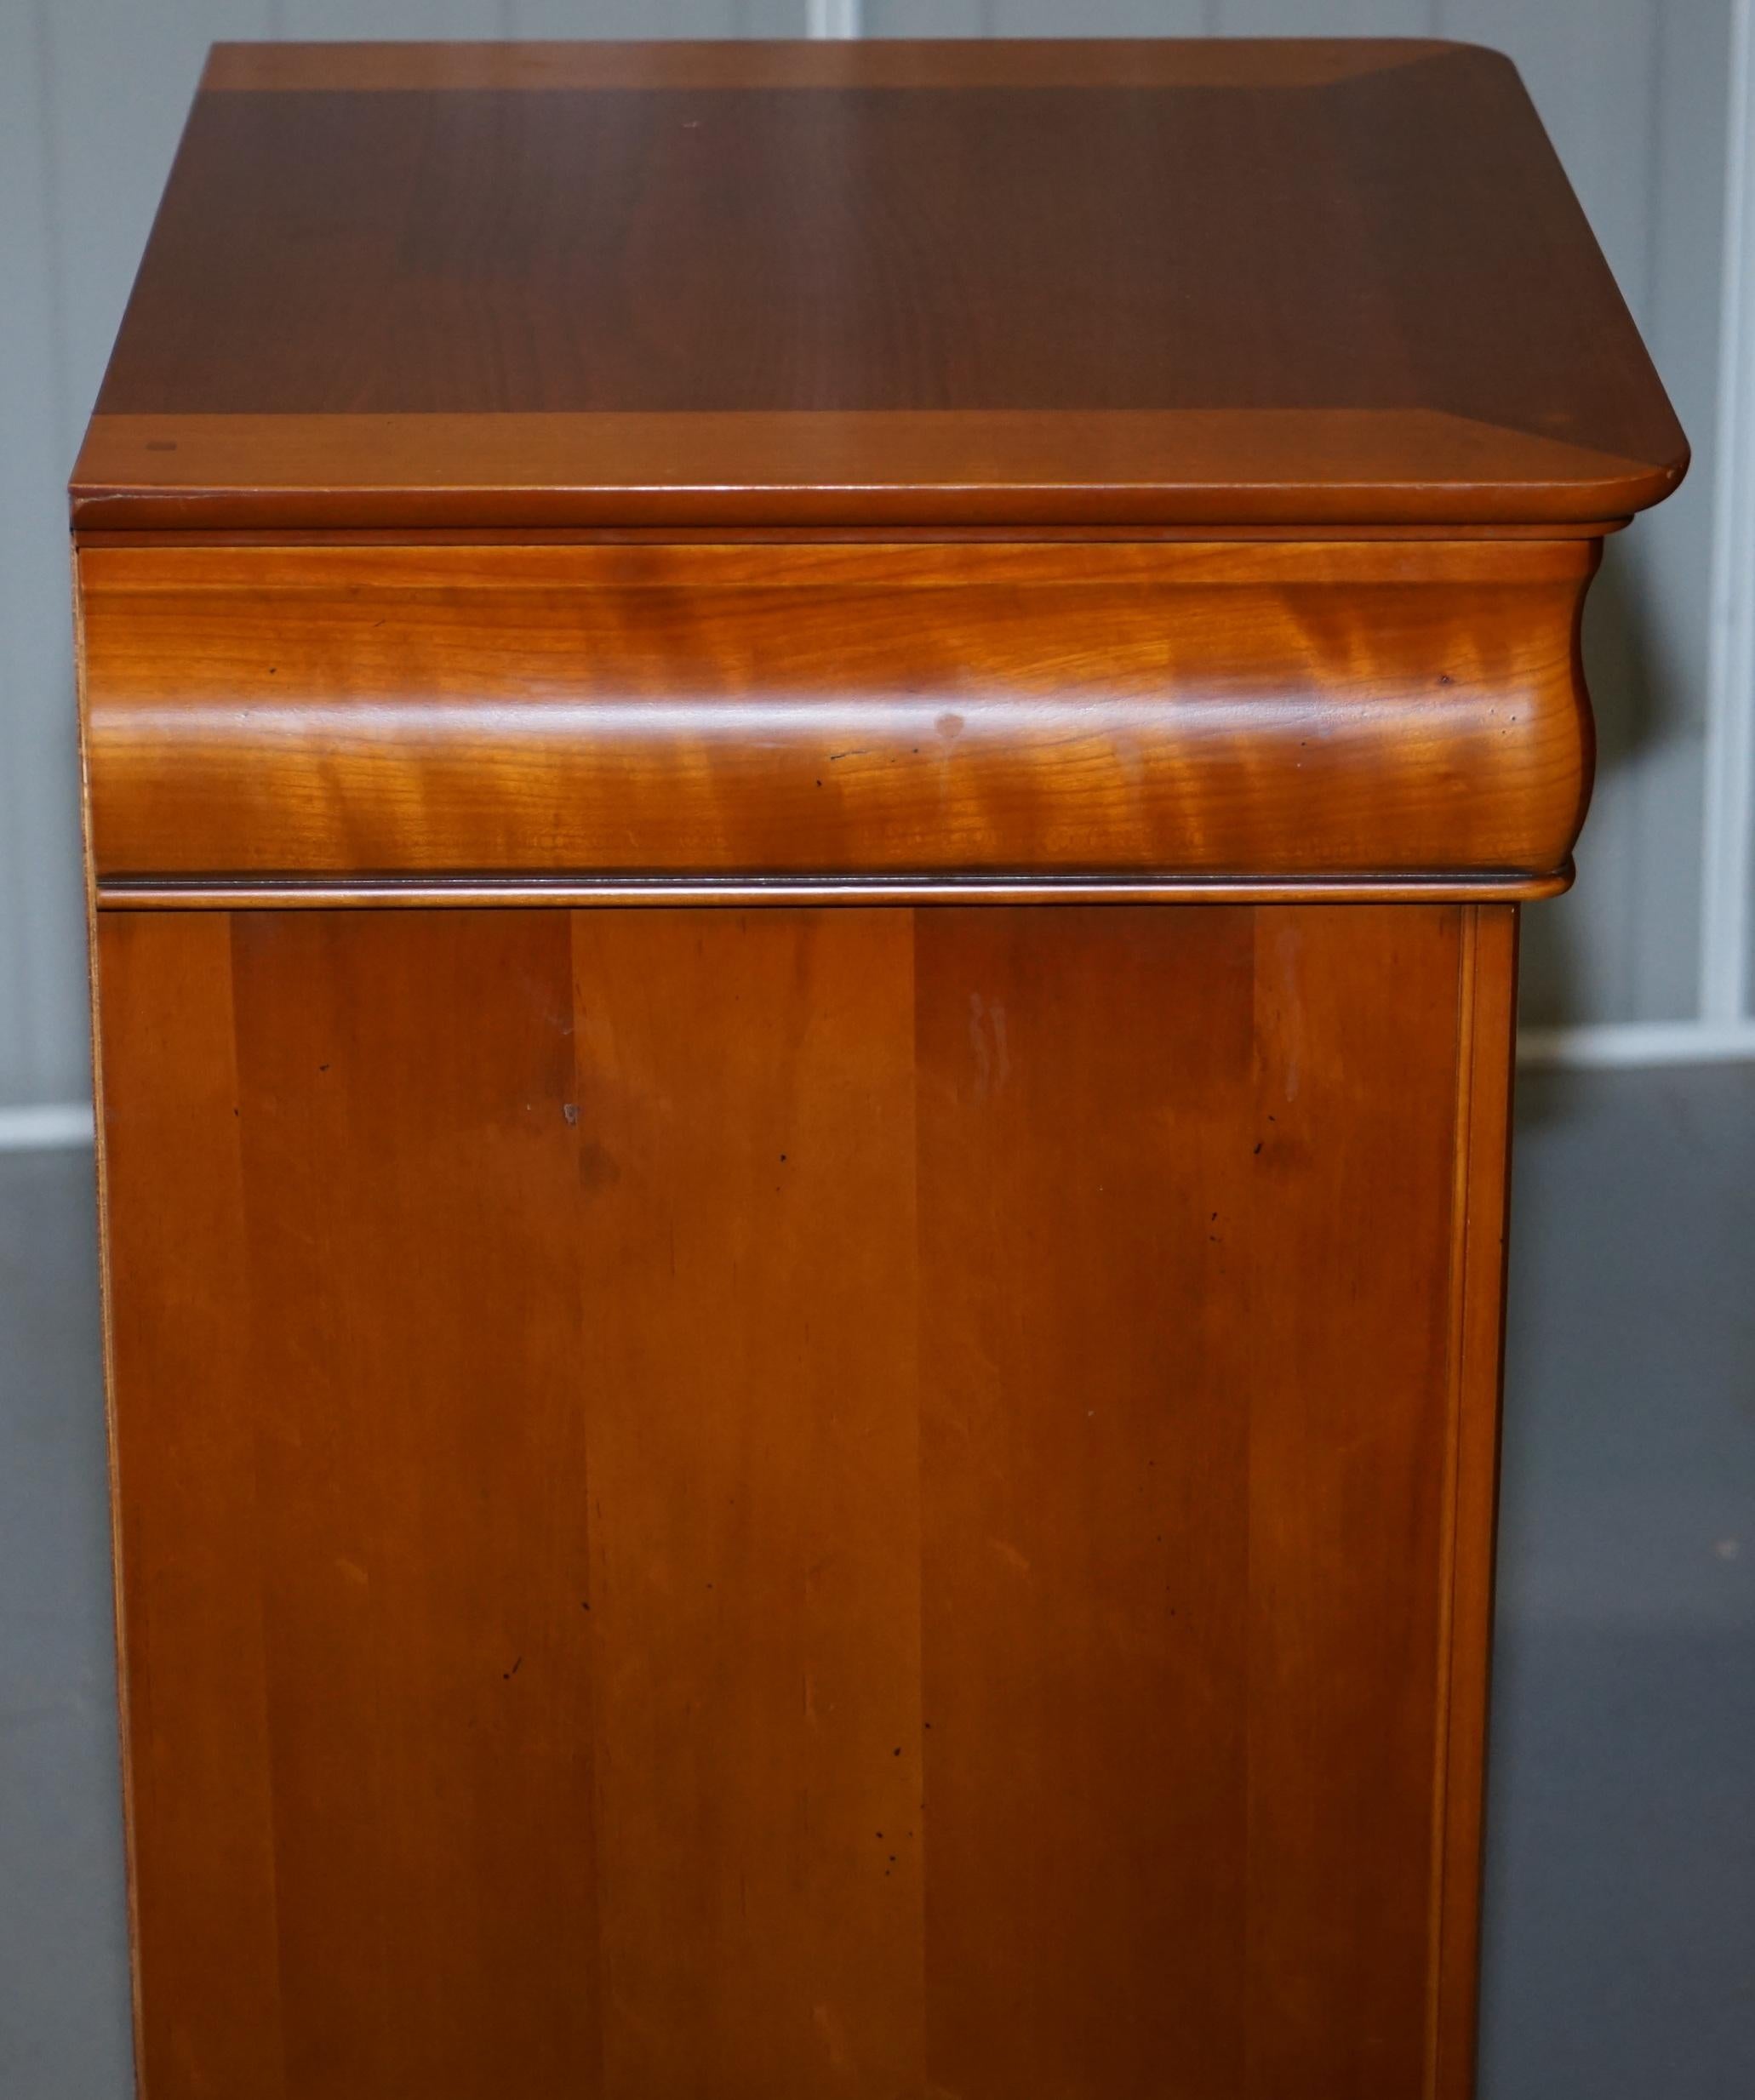 Hand-Crafted Pair of Large Solid Cherry Wood Bedside Table Chest of Drawers Part of a Suite